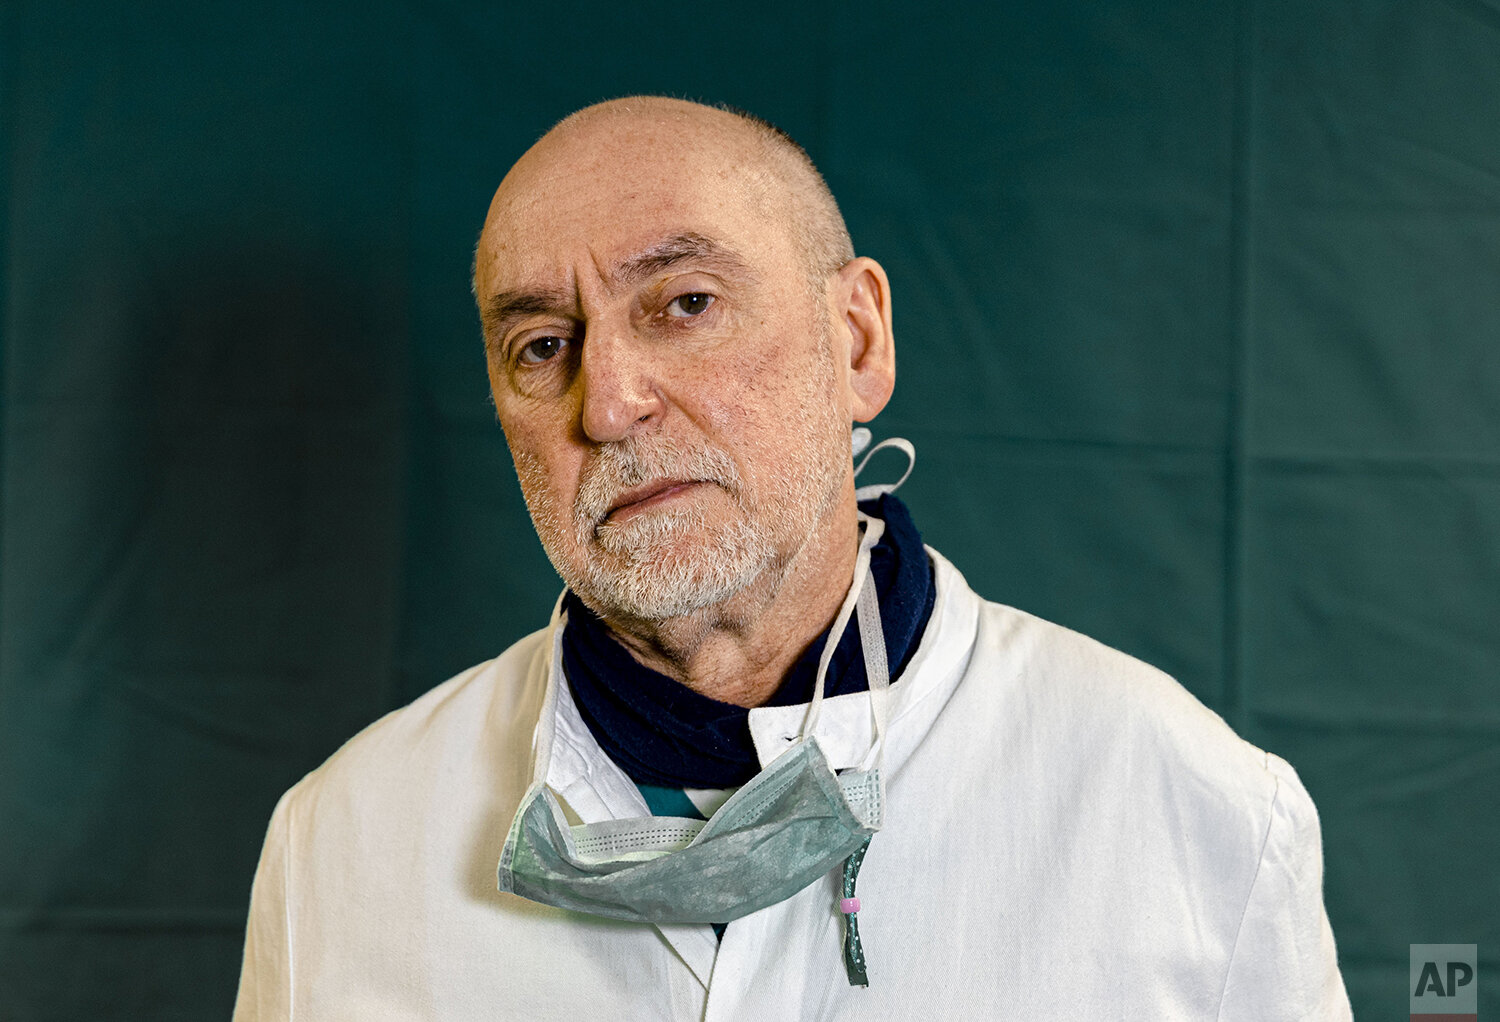  Director of the Intensive Care unit Gabriele Tomasoni, 65, poses for a portrait at the Brescia Spedali Civic Hospital, in Brescia, Italy Friday, March 27, 2020. The intensive care doctors and nurses on the front lines of the coronavirus pandemic in 